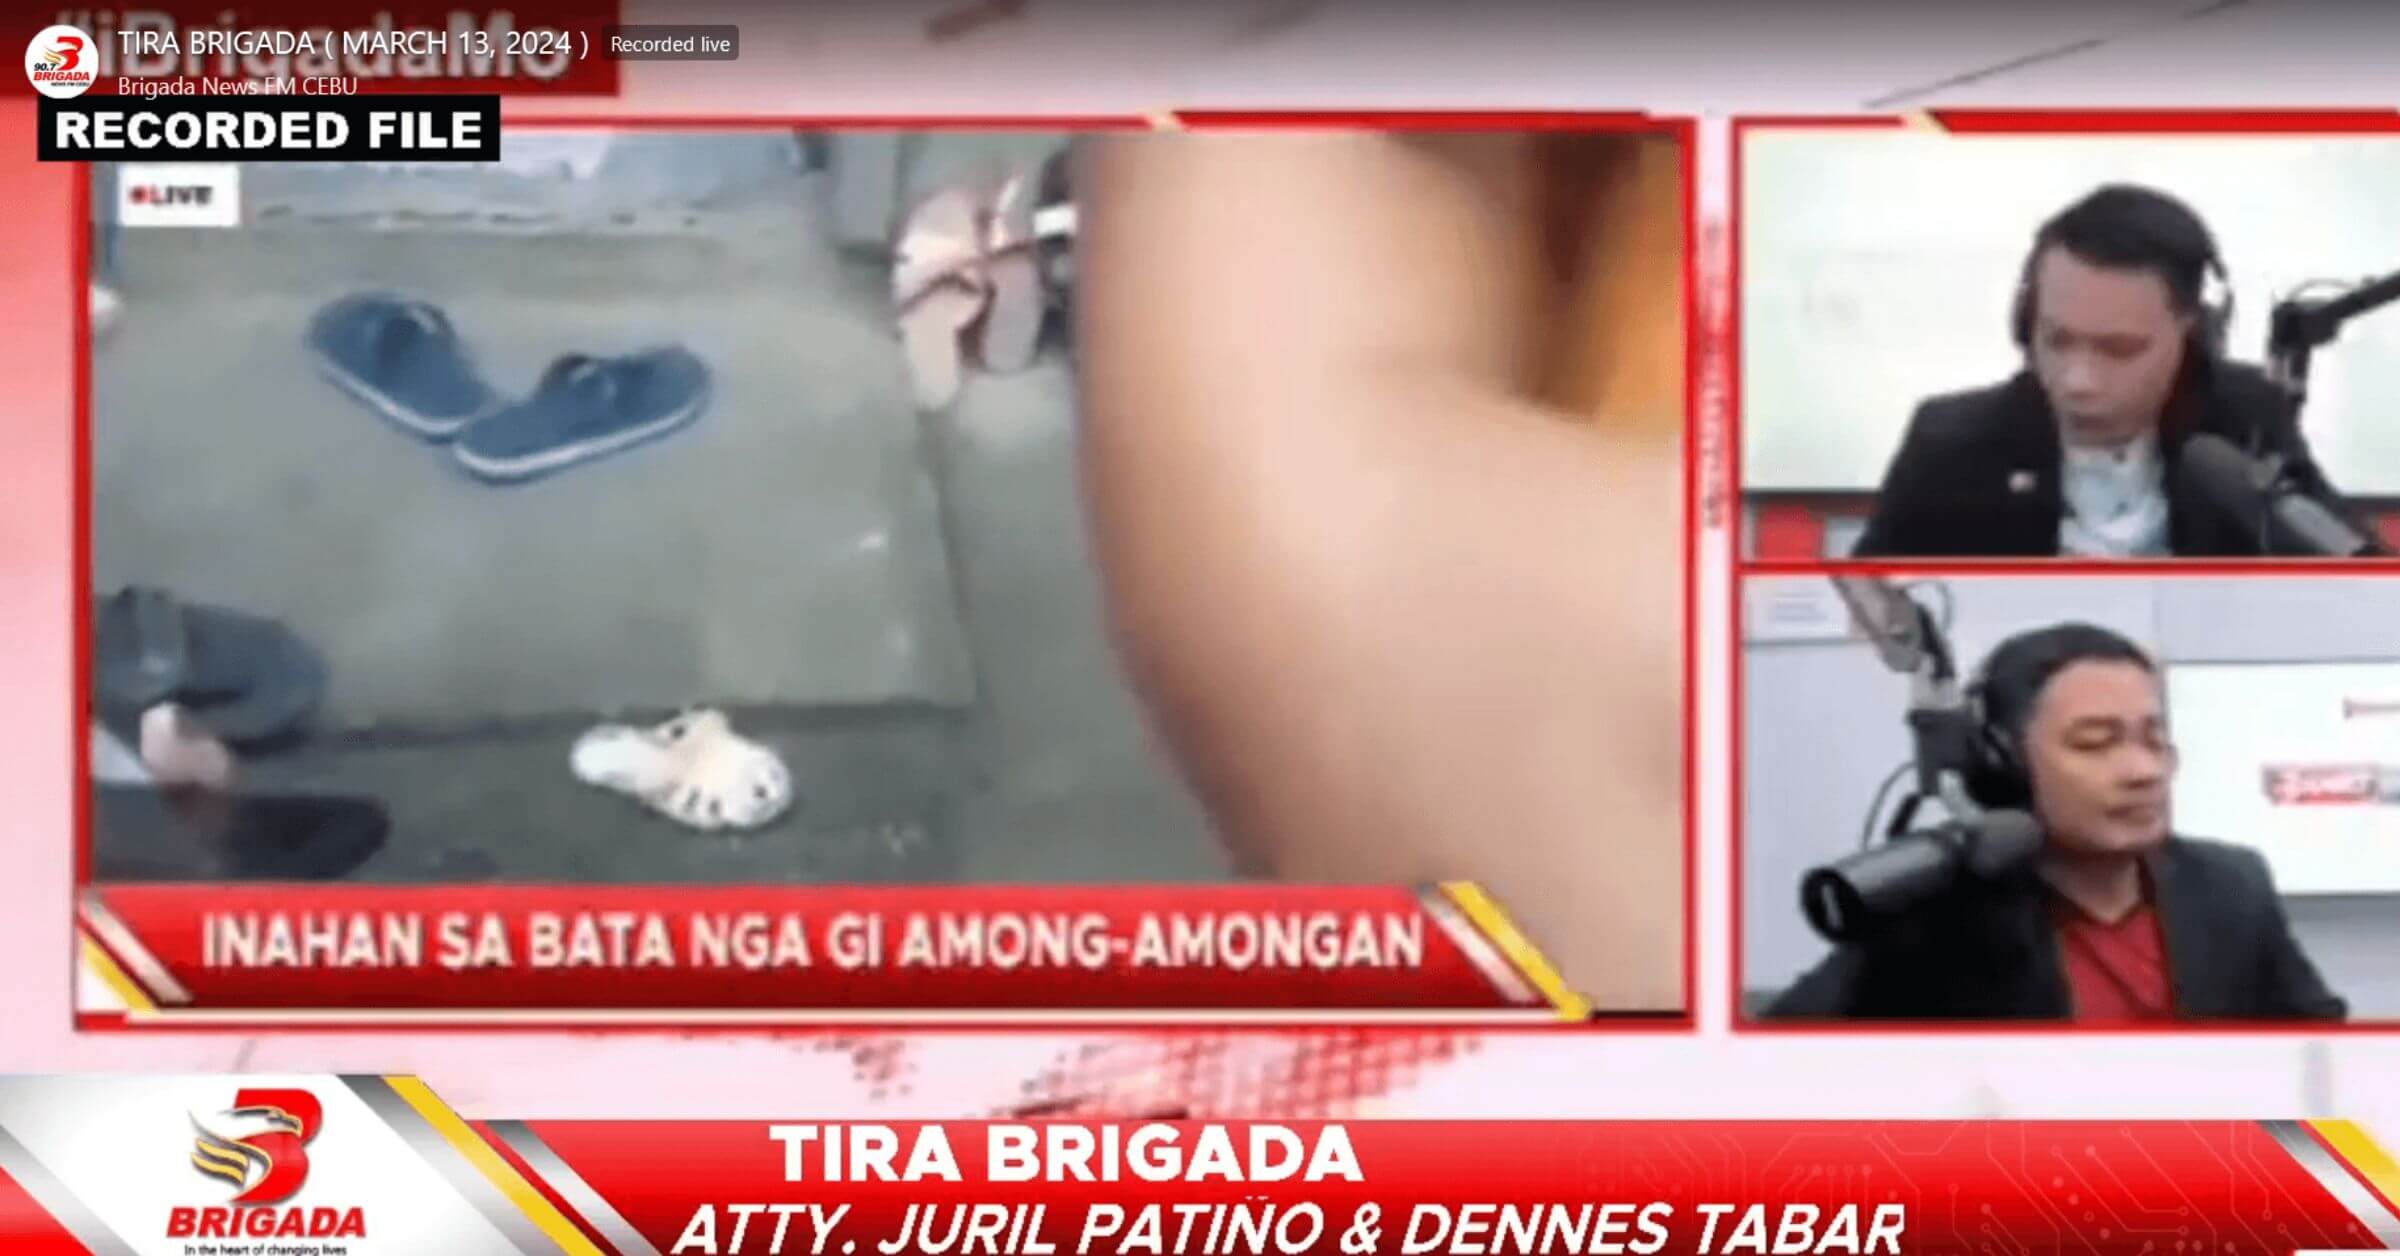 Cebu broadcaster (a lawyer!) lets child rape victim recount abuse in lurid details on air